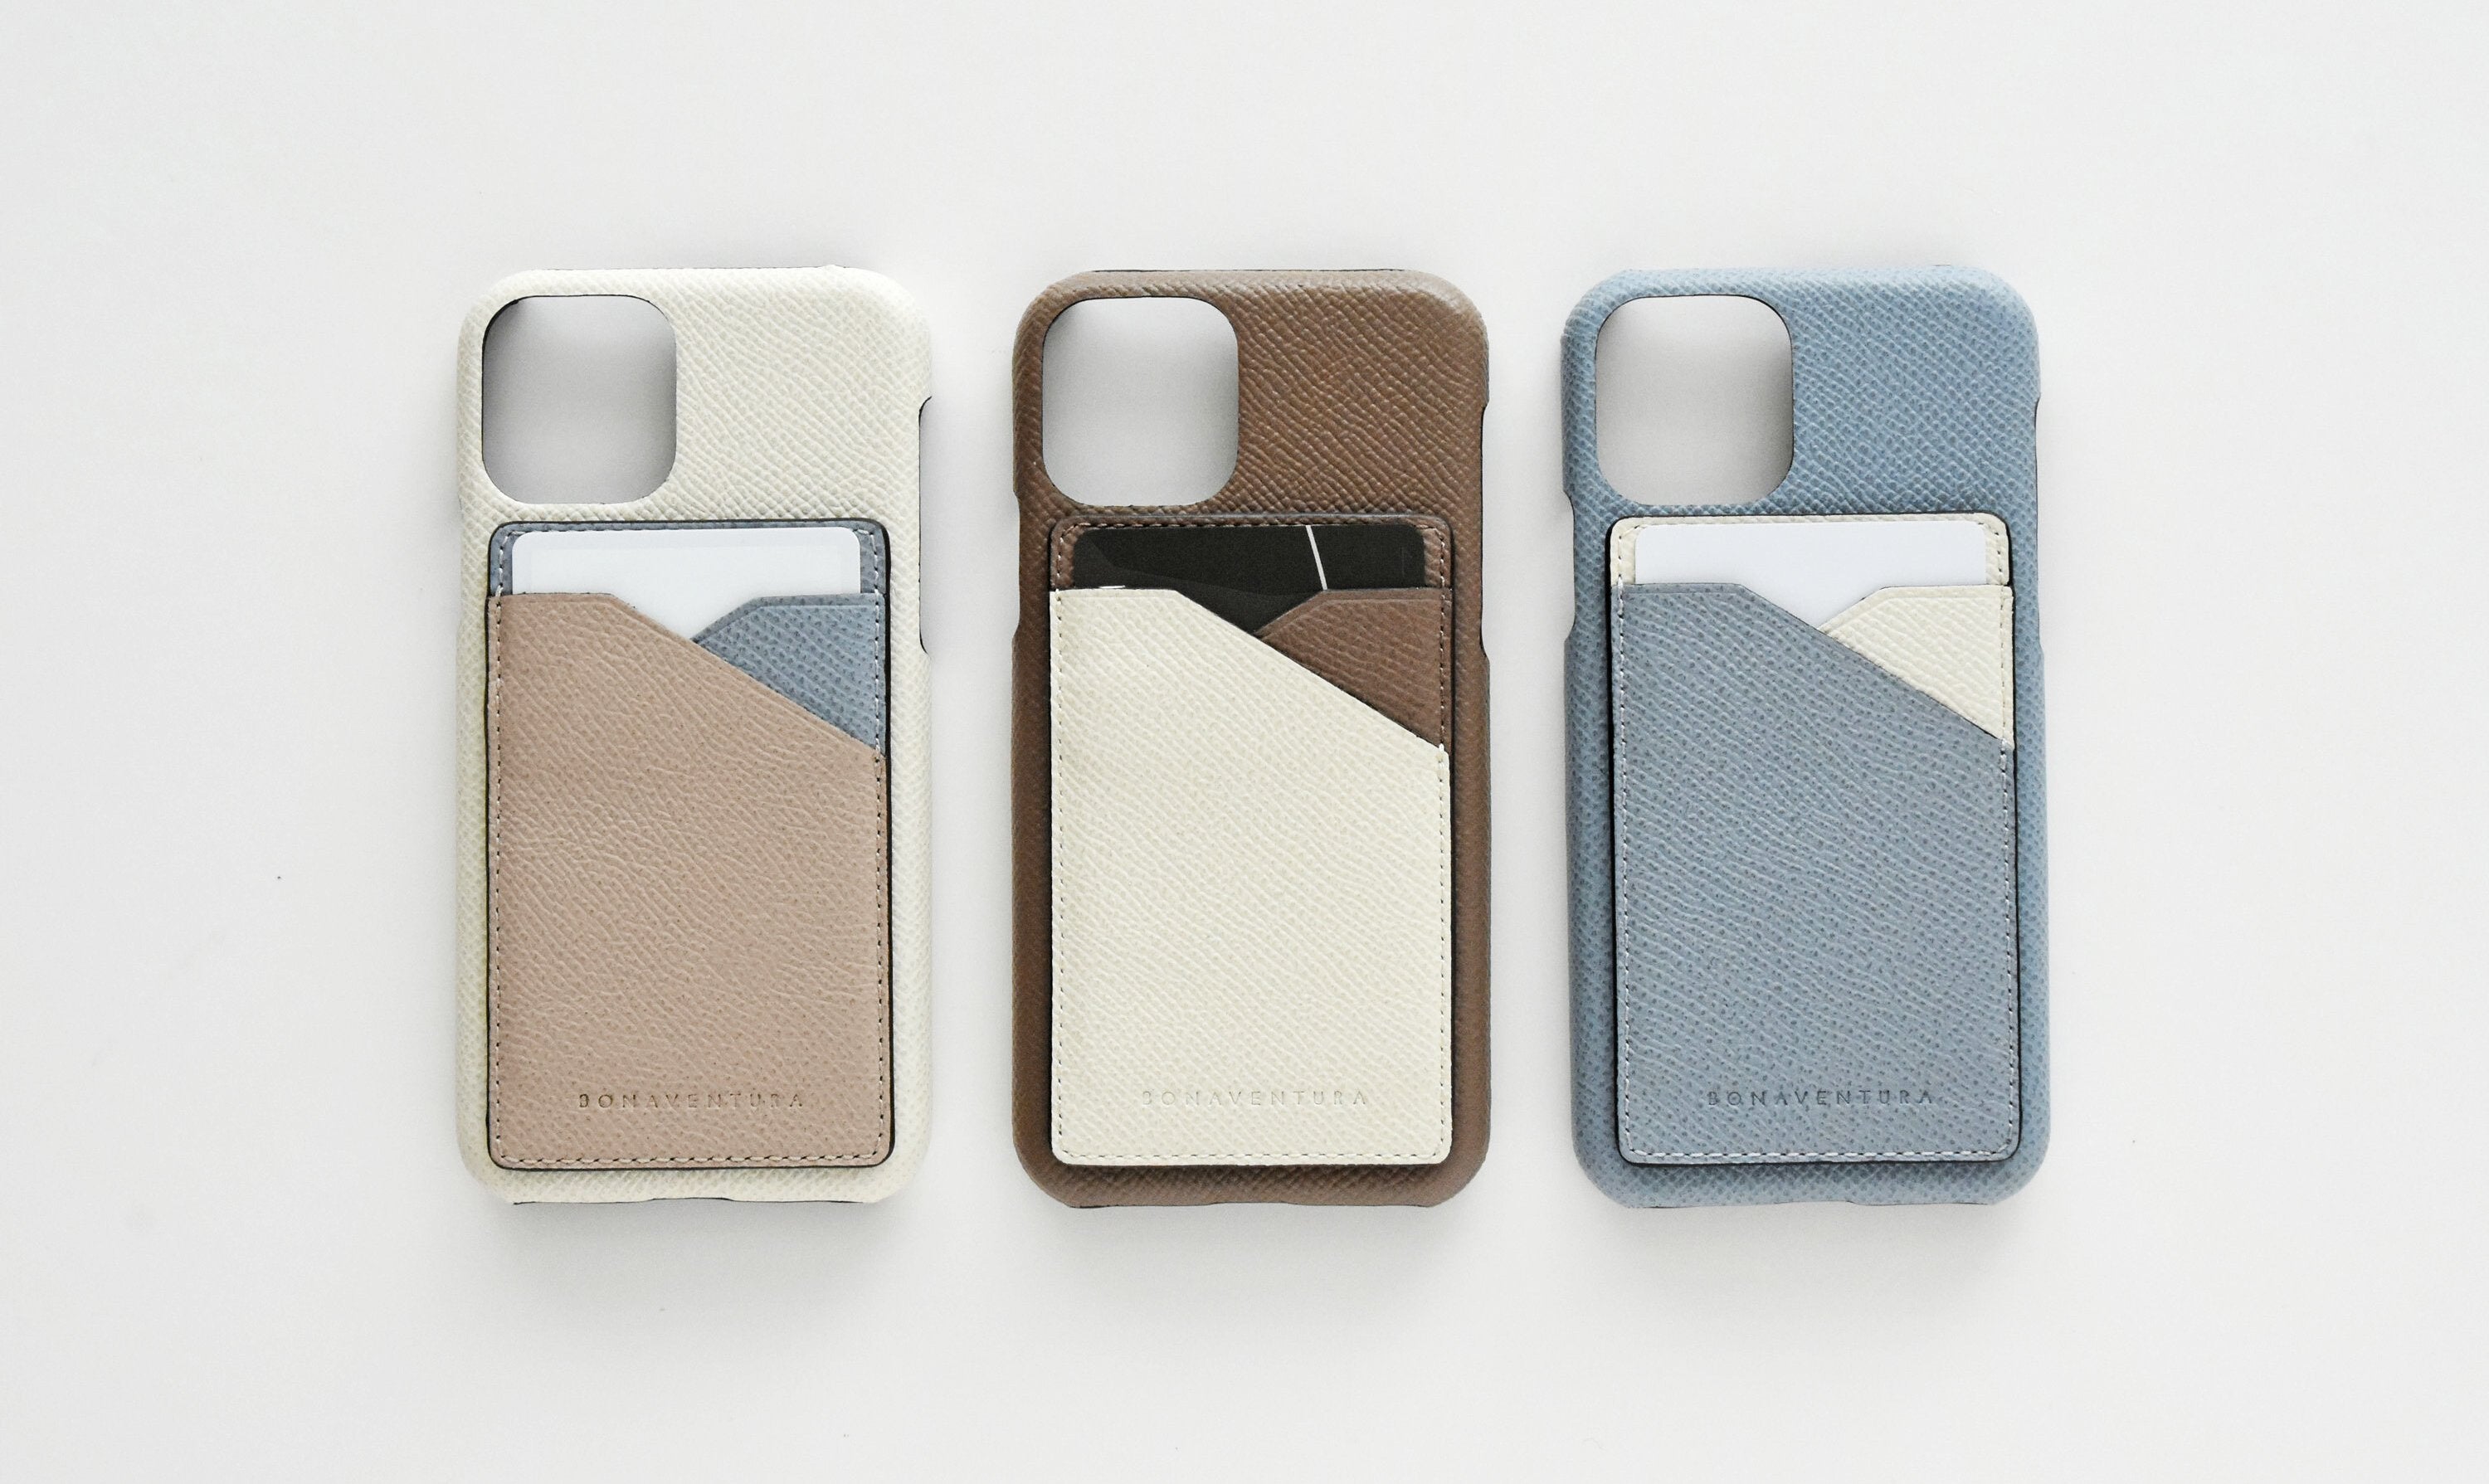 High-quality BONAVENTURA iPhone accessories made of Noblessa leather with removable card slot in various colors.